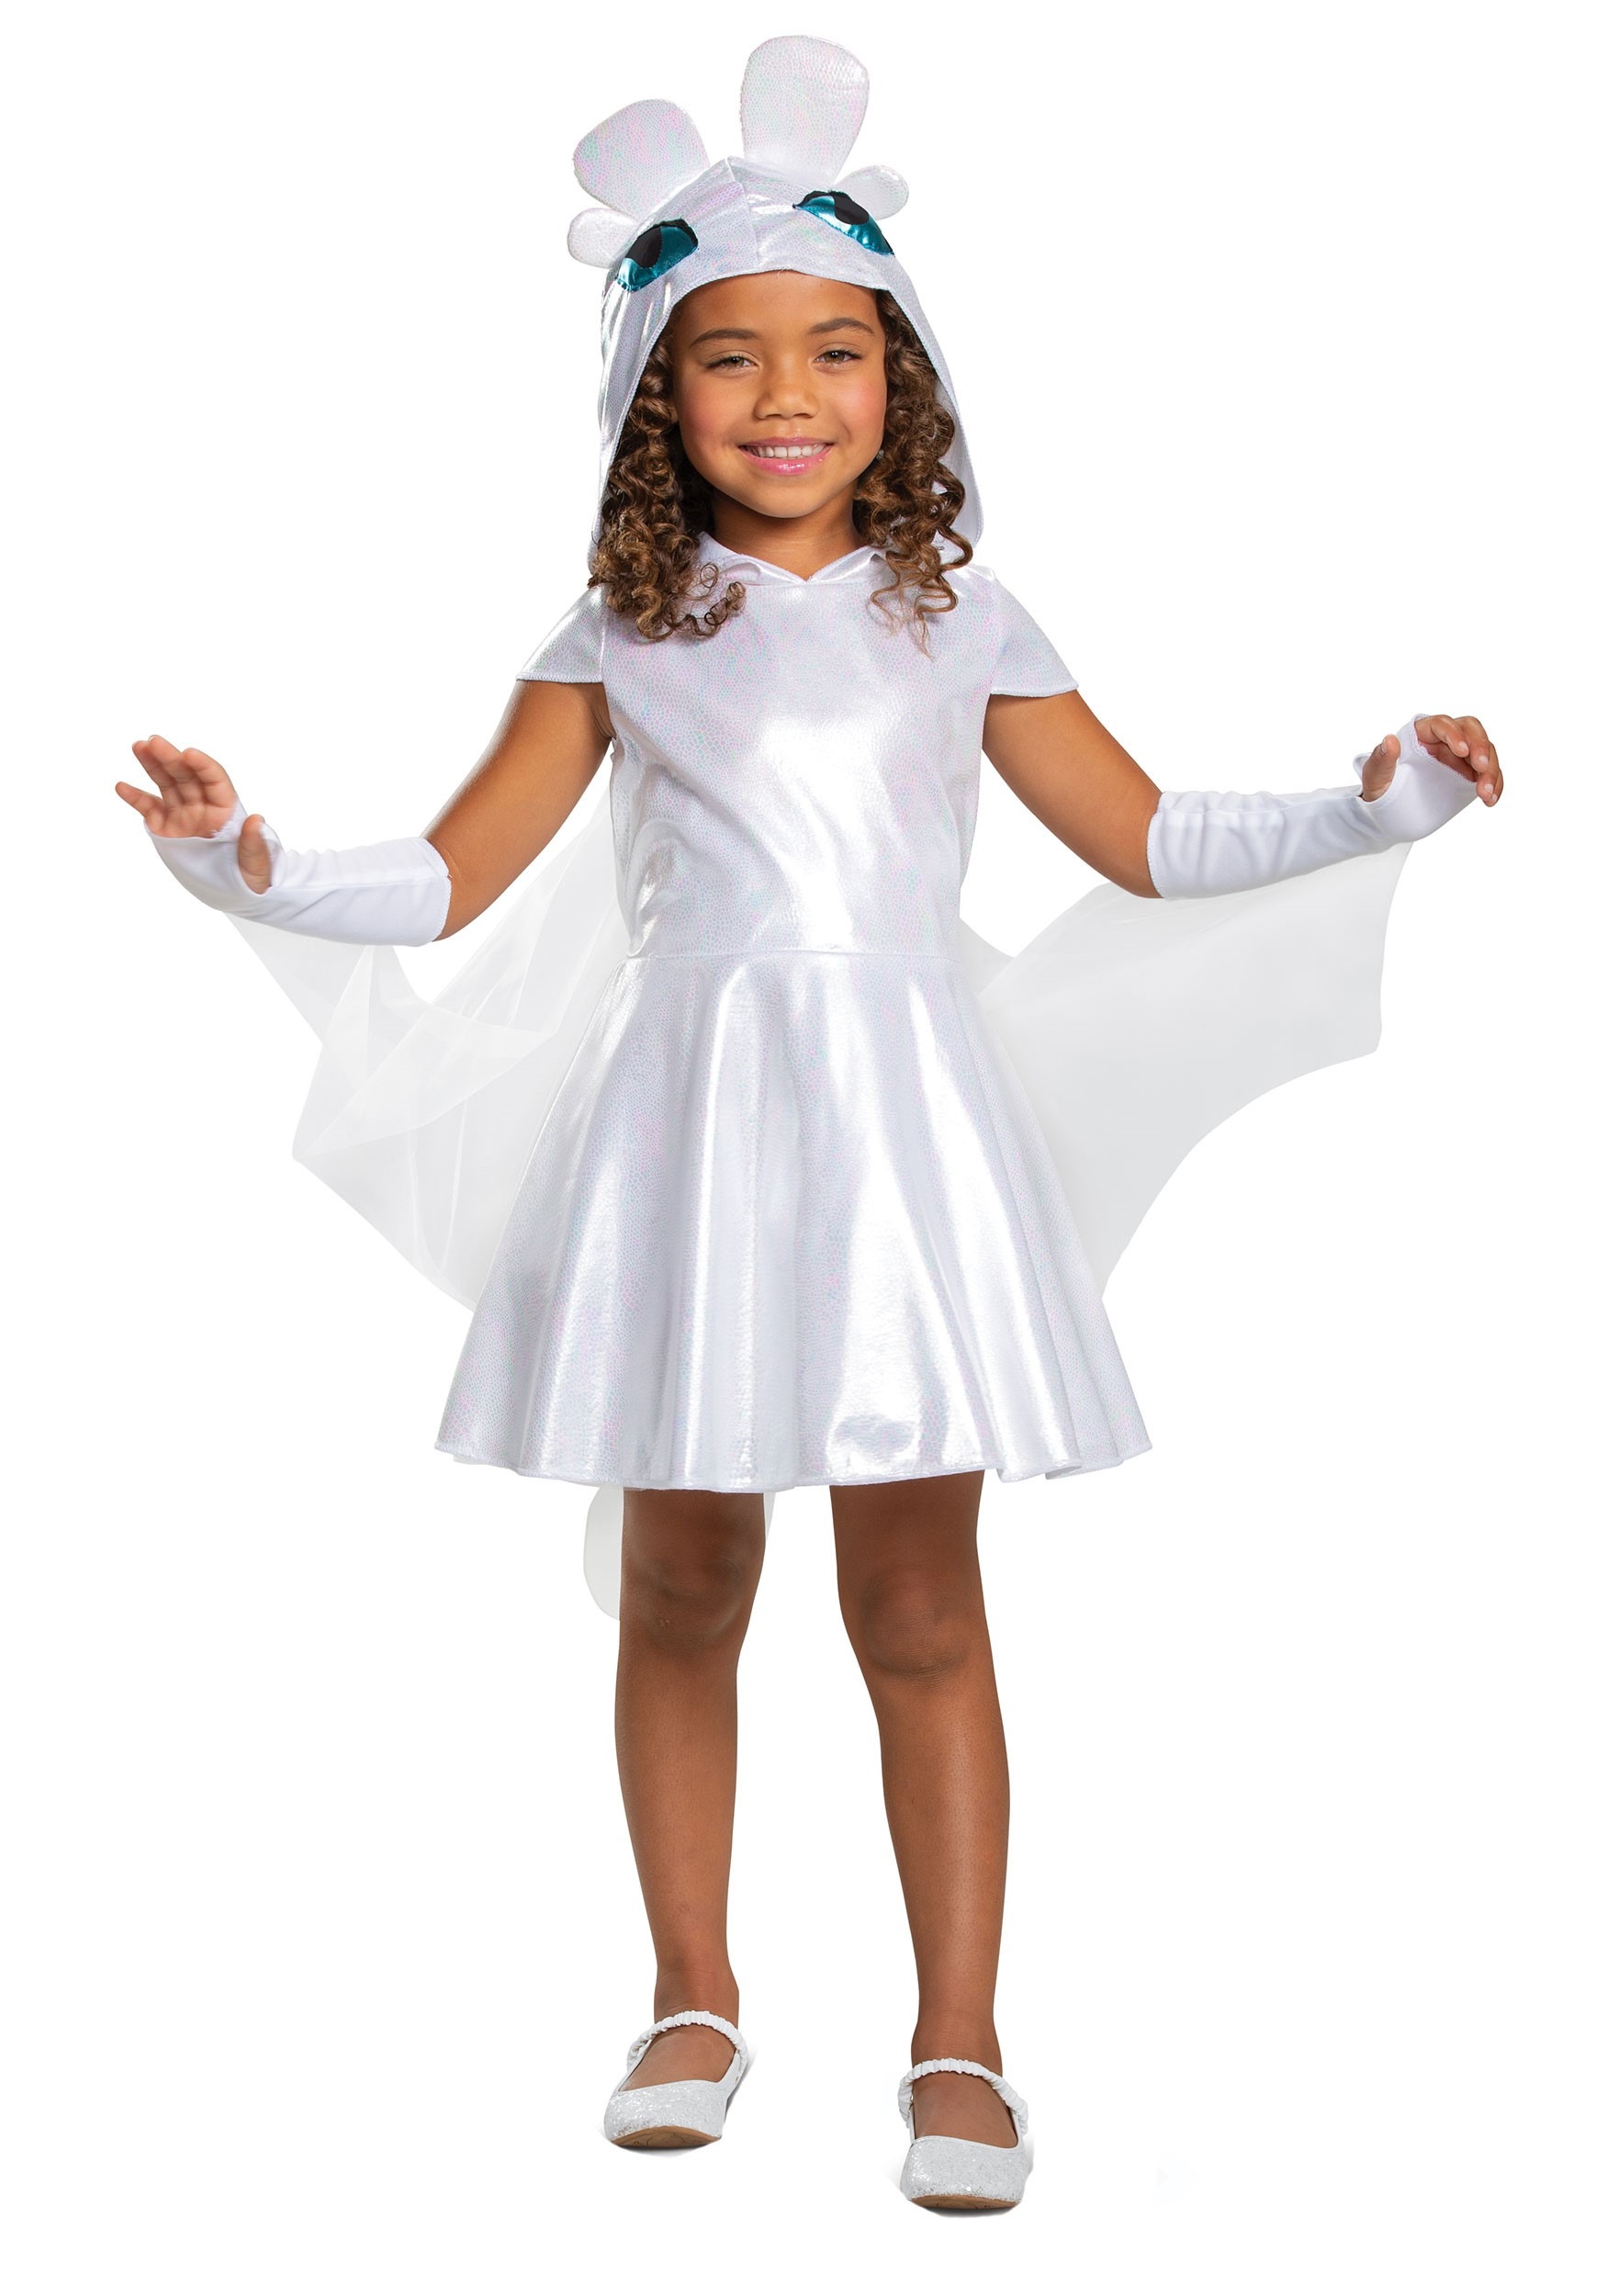 How to Train Your Dragon Light Fury Classic Costume for Girls